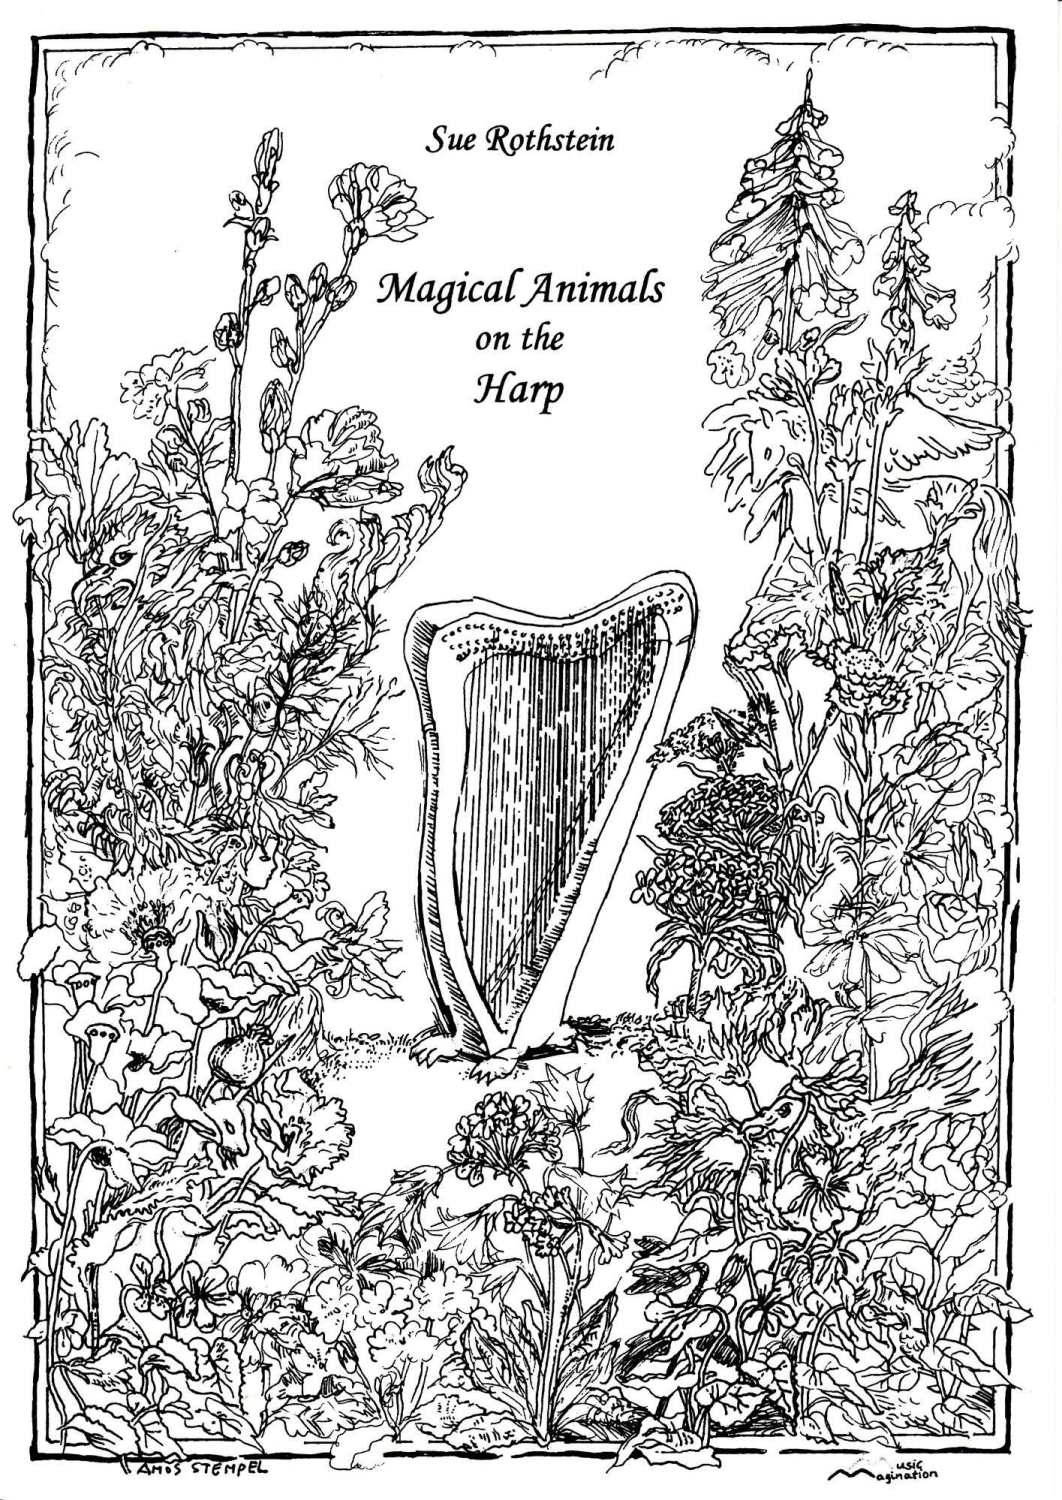 Magical Animals on the Harp - Sue Rothstein